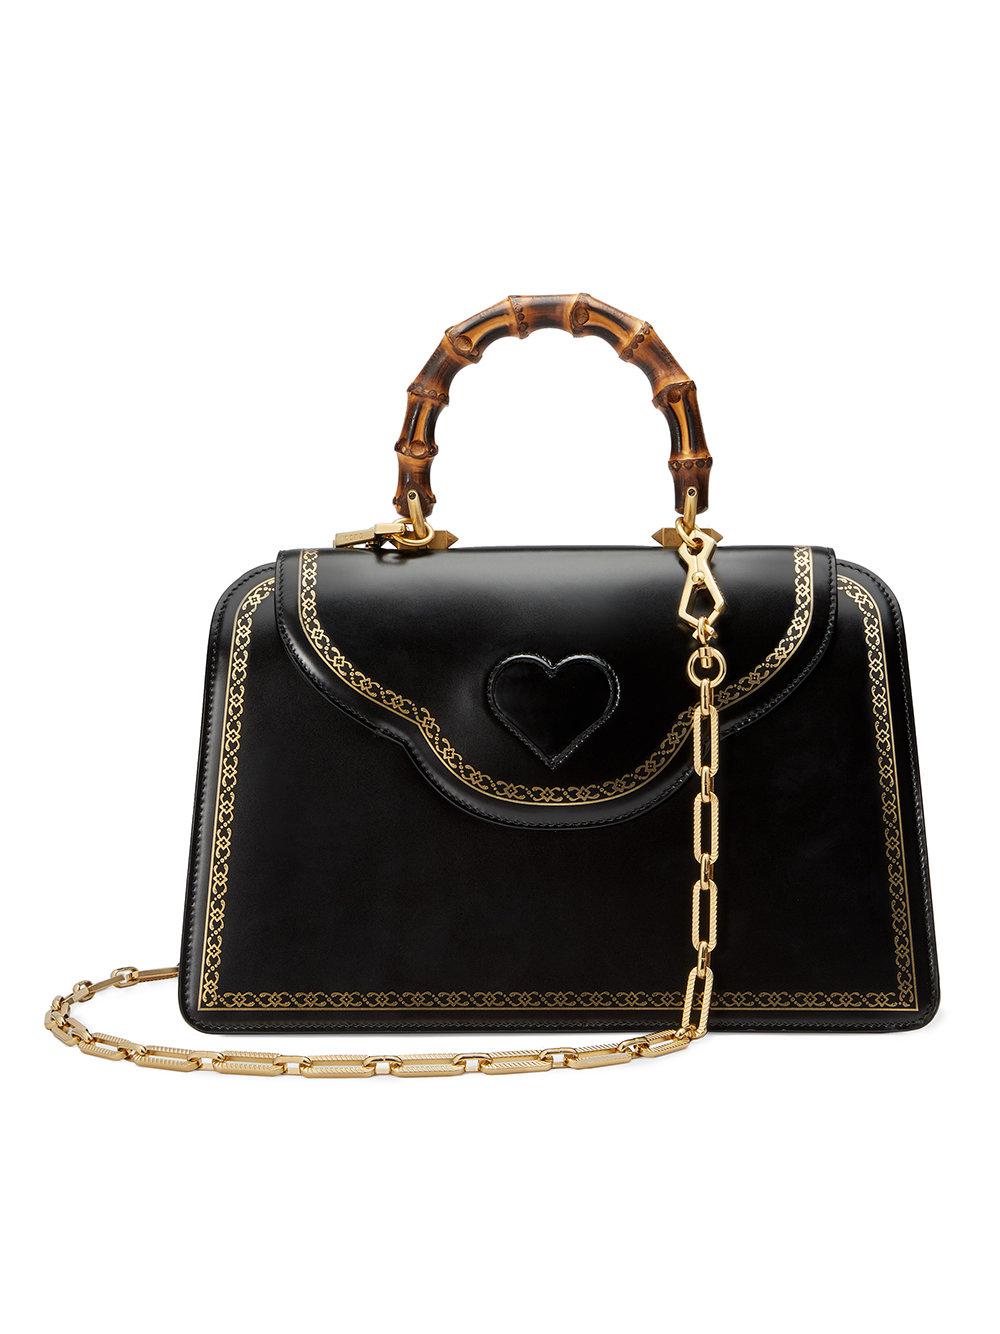 Gucci Frame Print Leather Top Handle Bag in Black Leather (Black) | Lyst